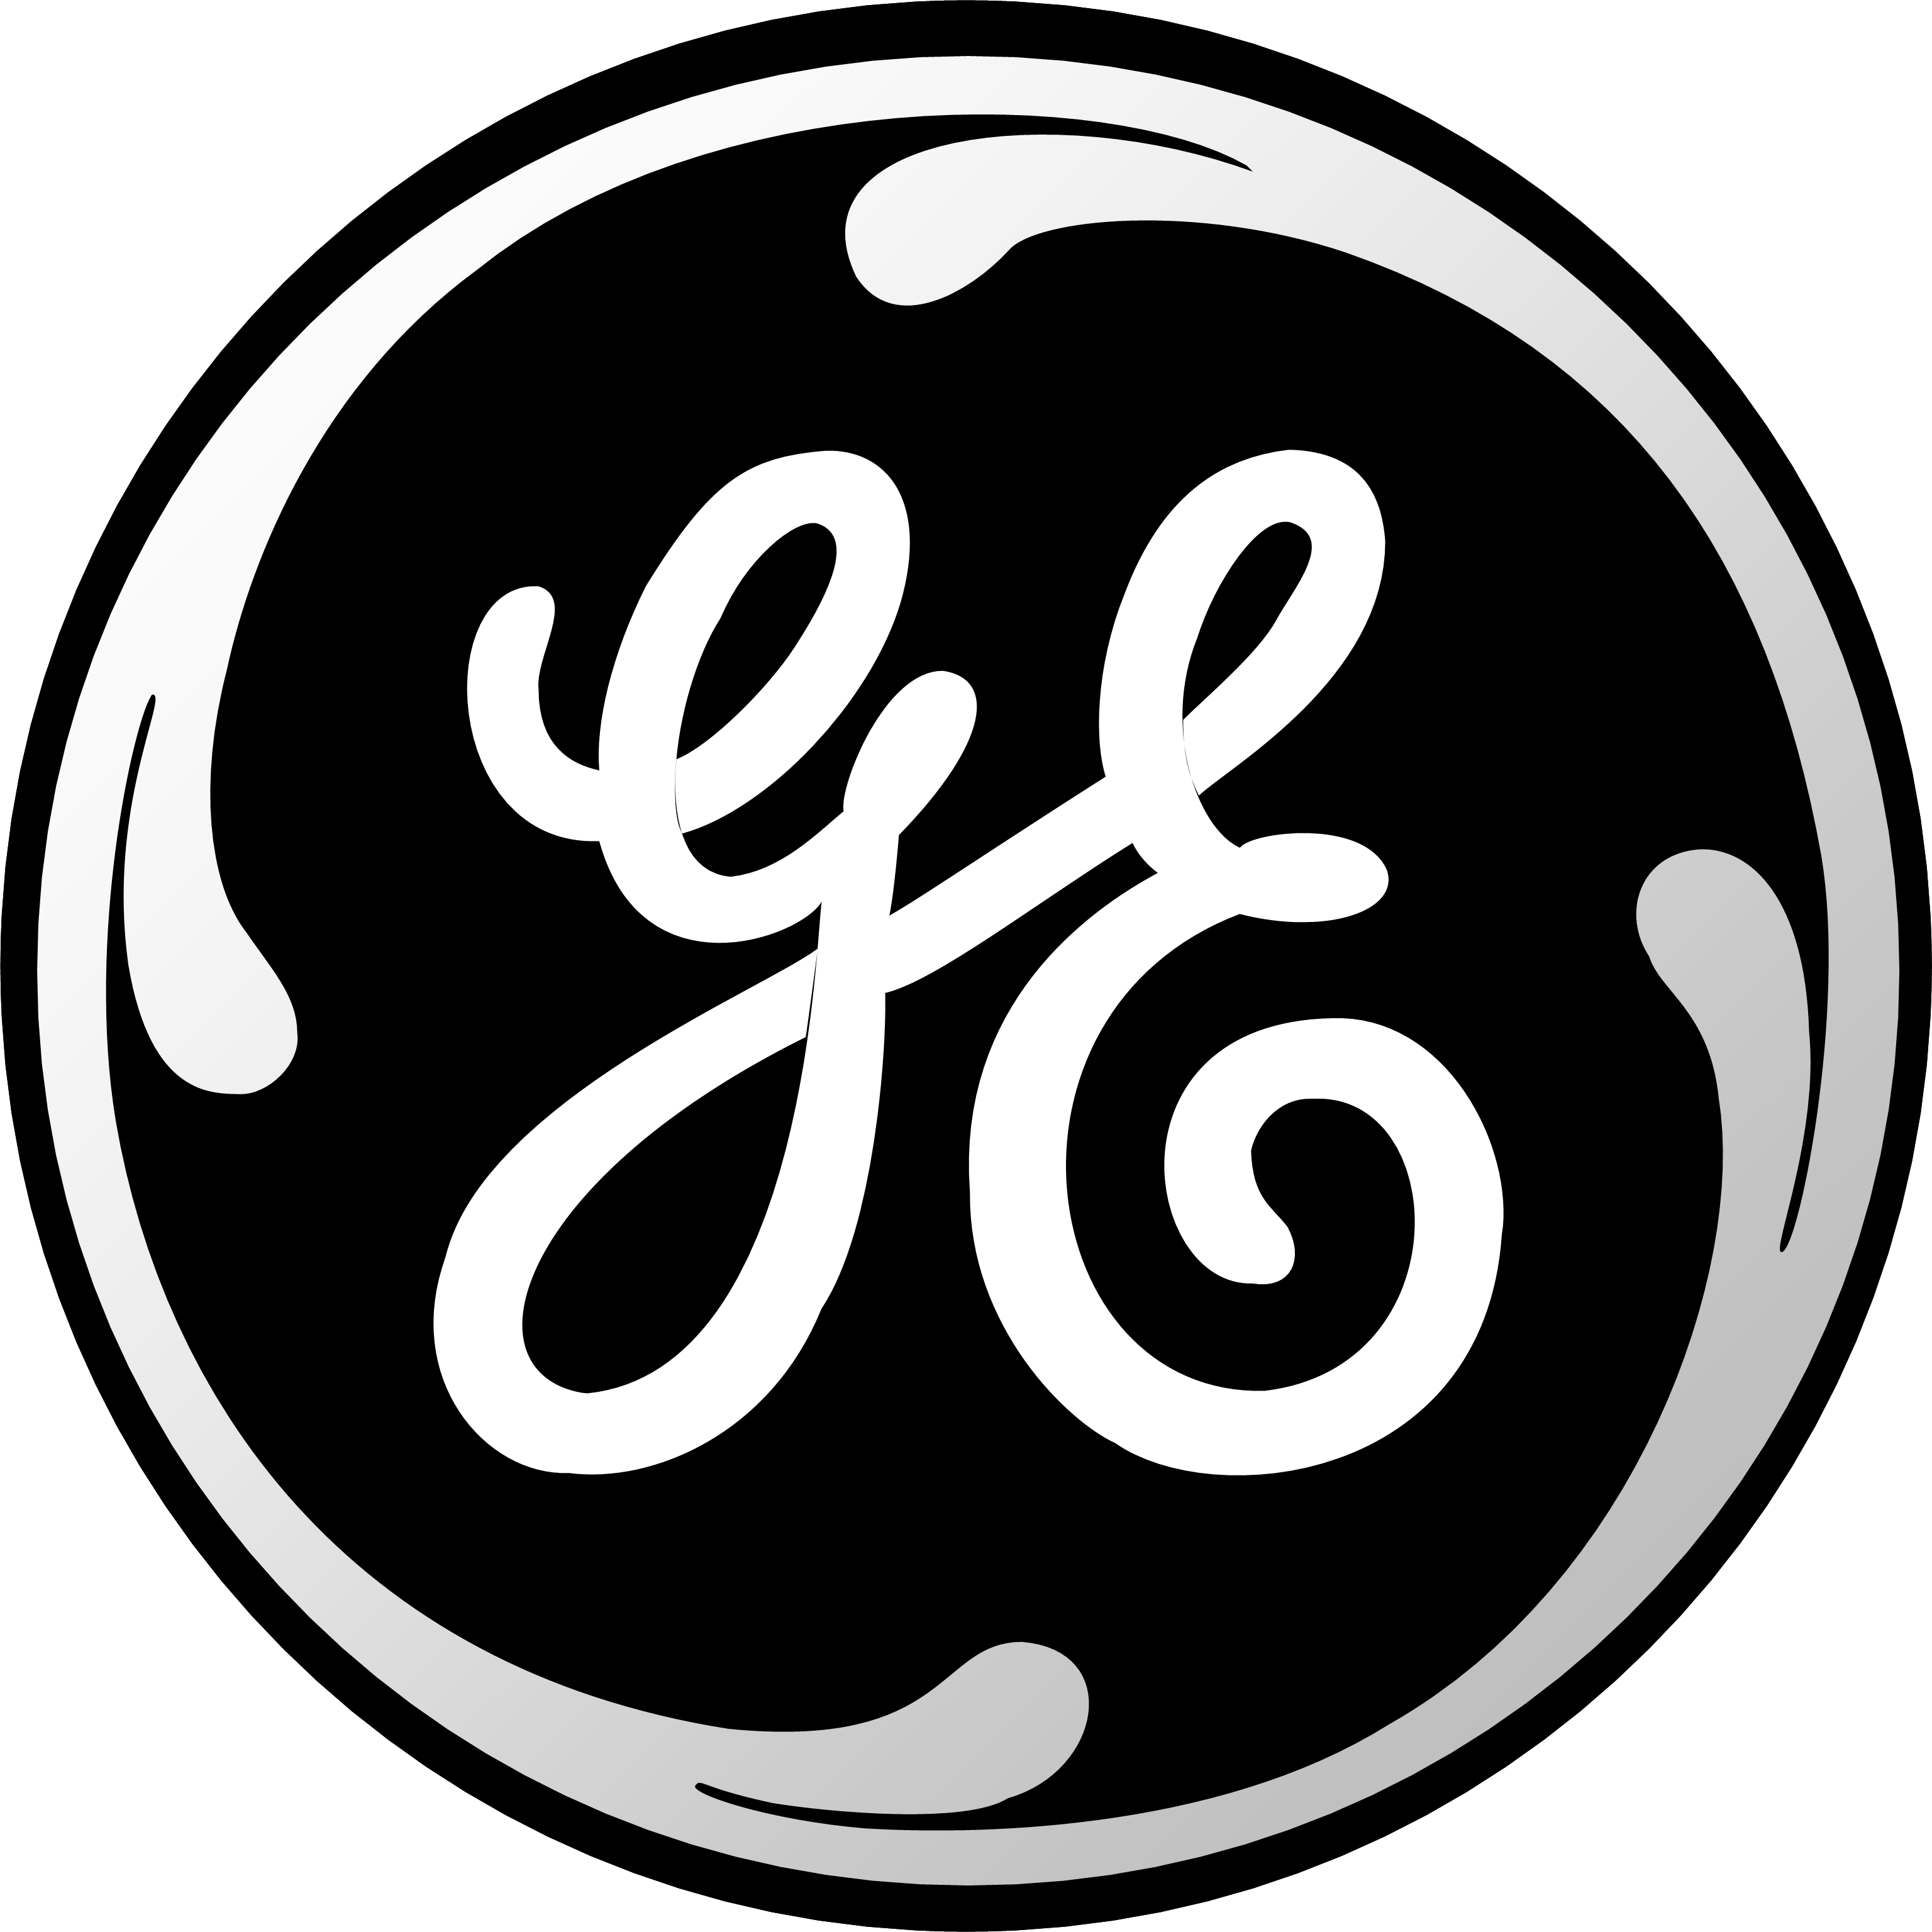 Image - General Electric 2003.png - Logopedia, the logo and branding site